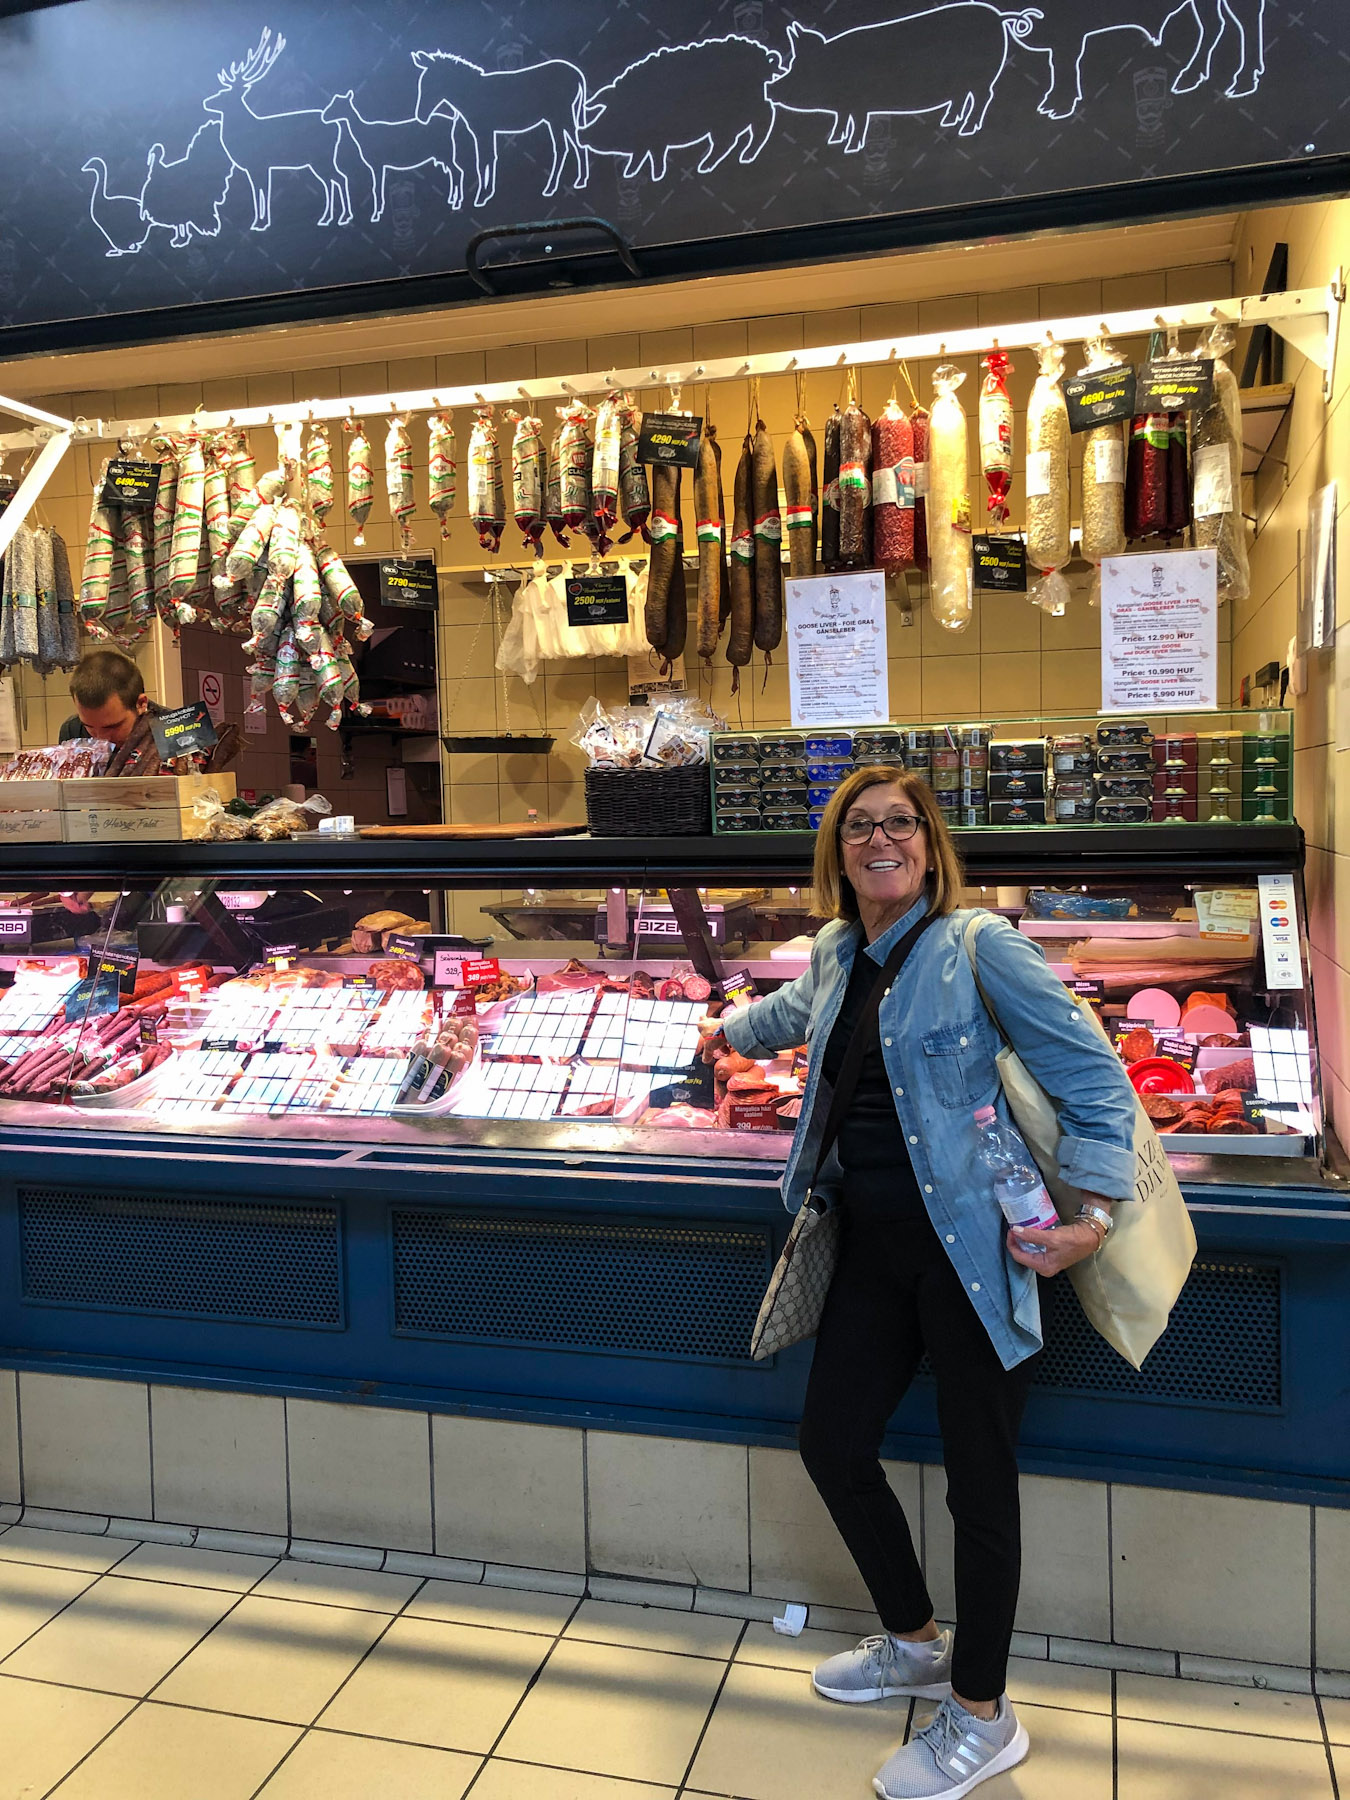 Mosey at the meat stand, Great Market Hall, Budapest, Hungary